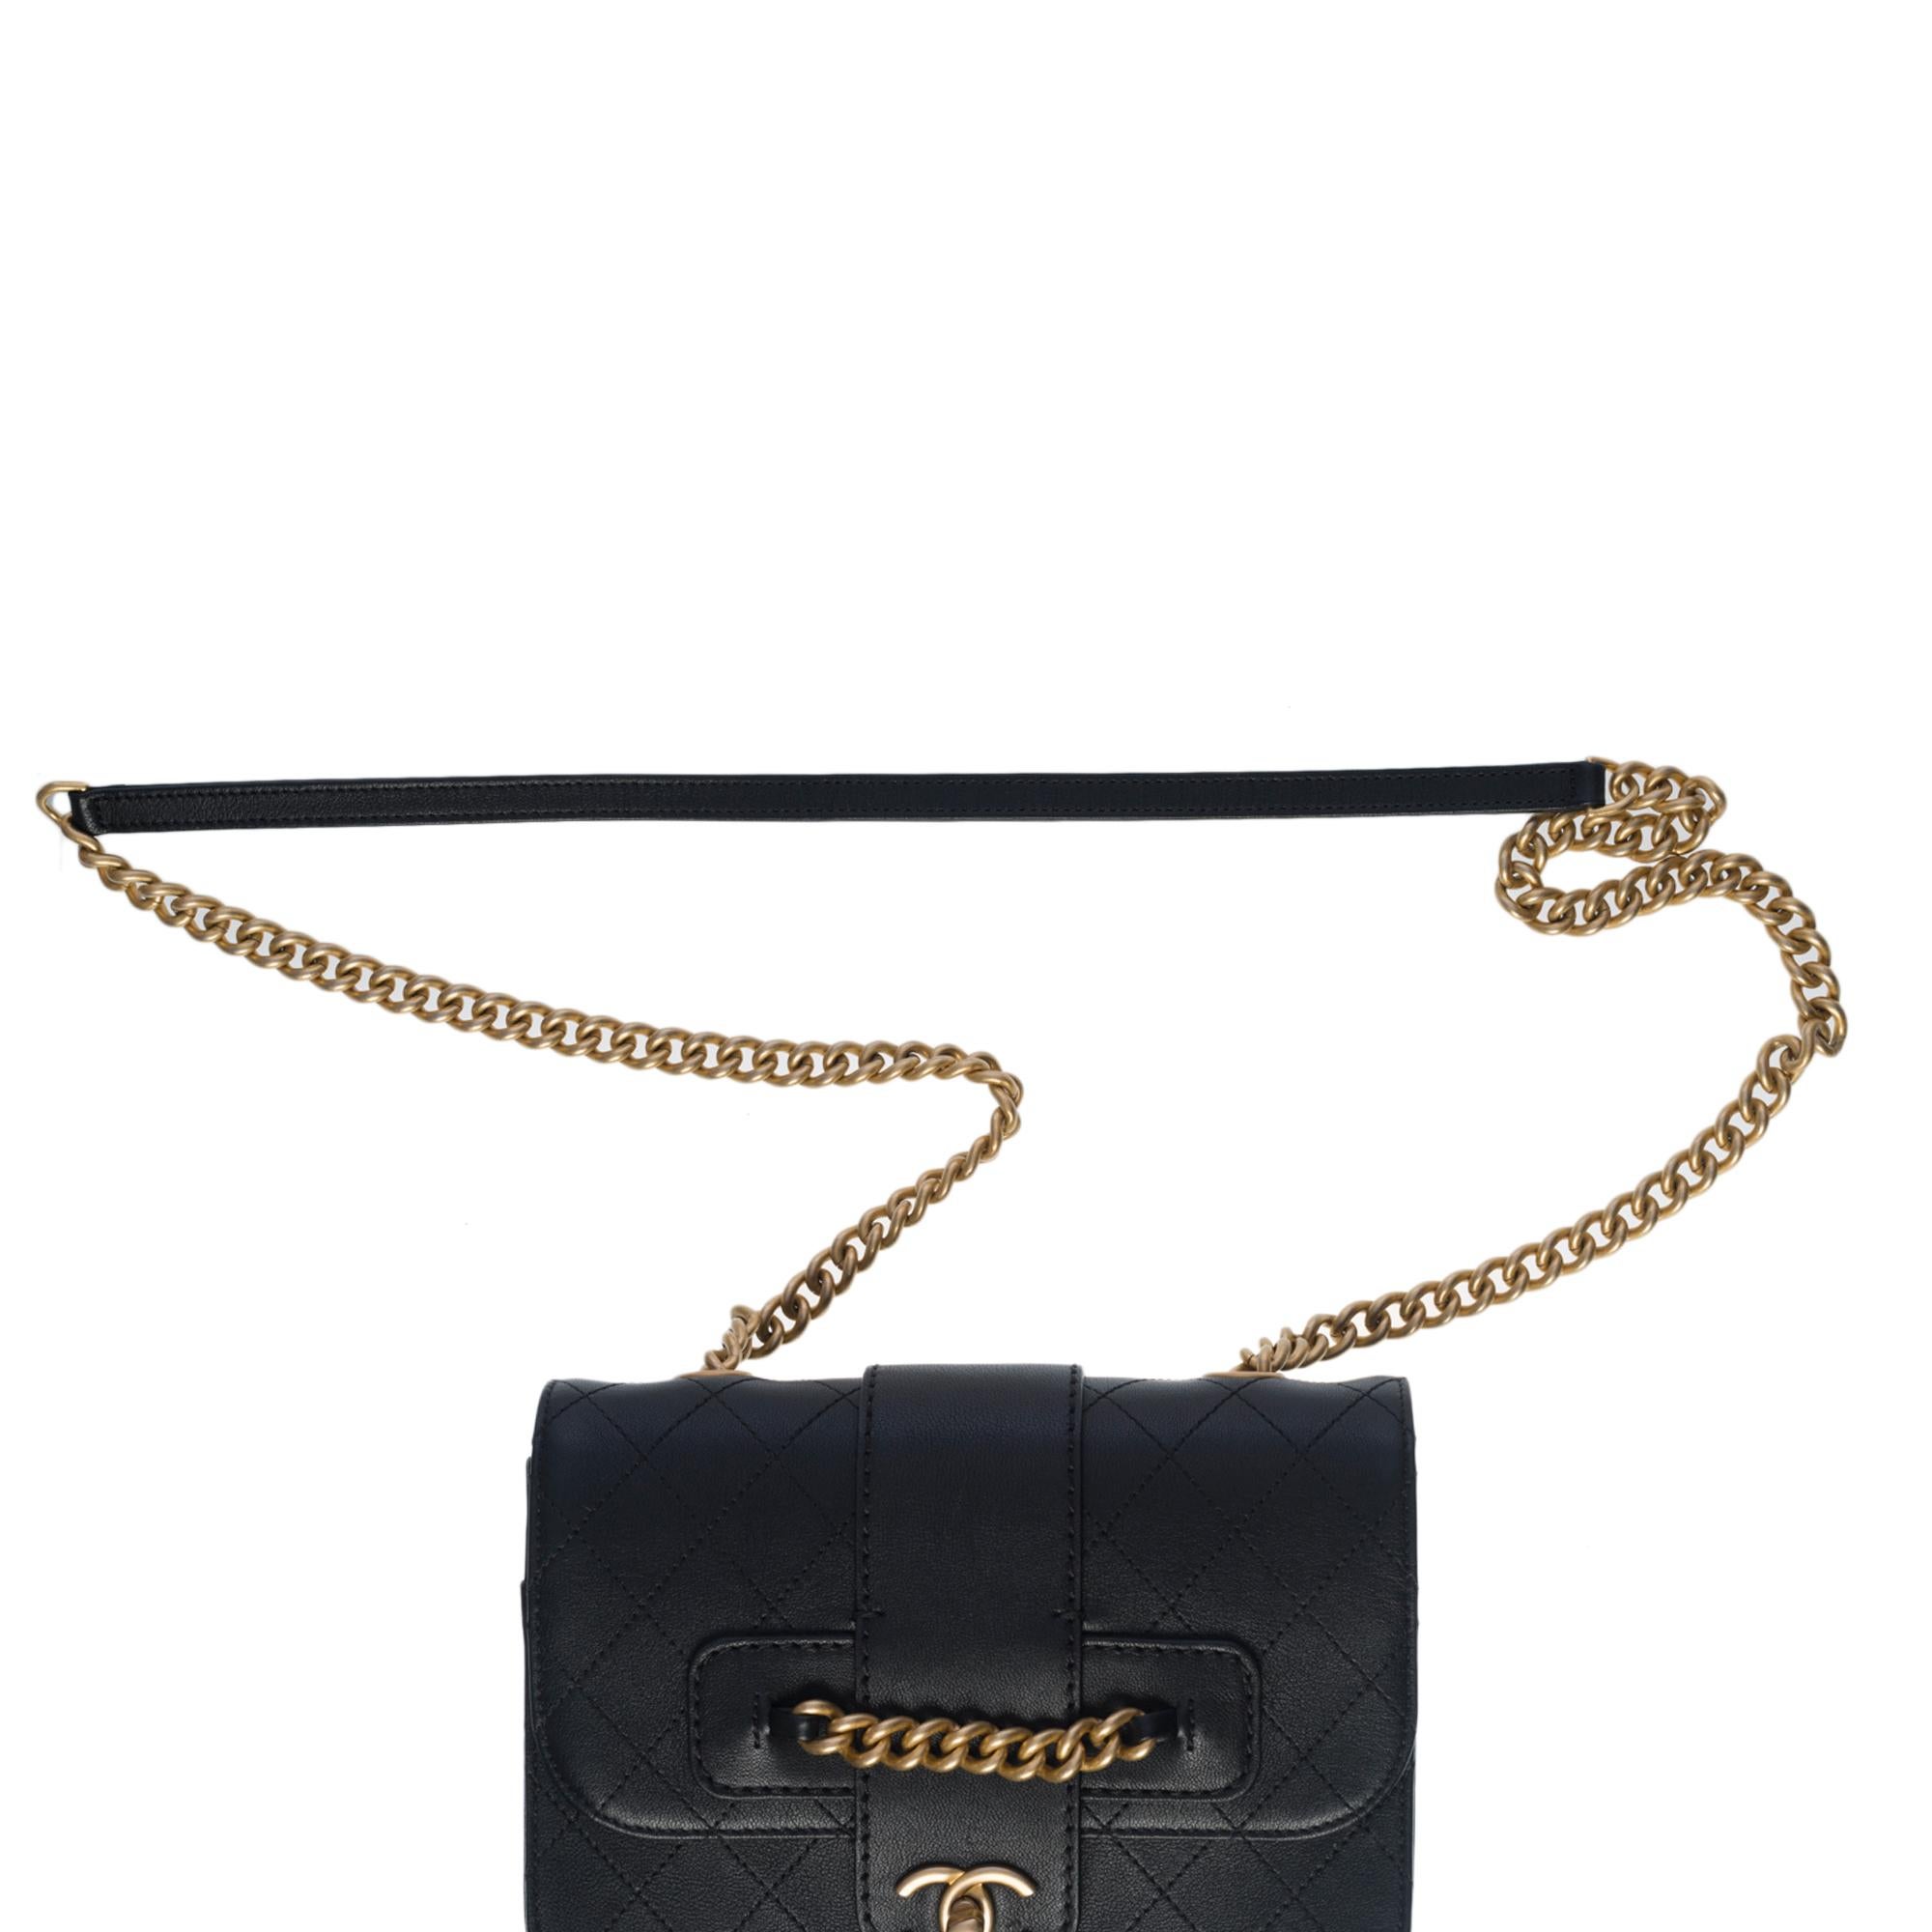 Limited Edition Chanel Classic shoulder flap bag in black calf leather, GHW 4